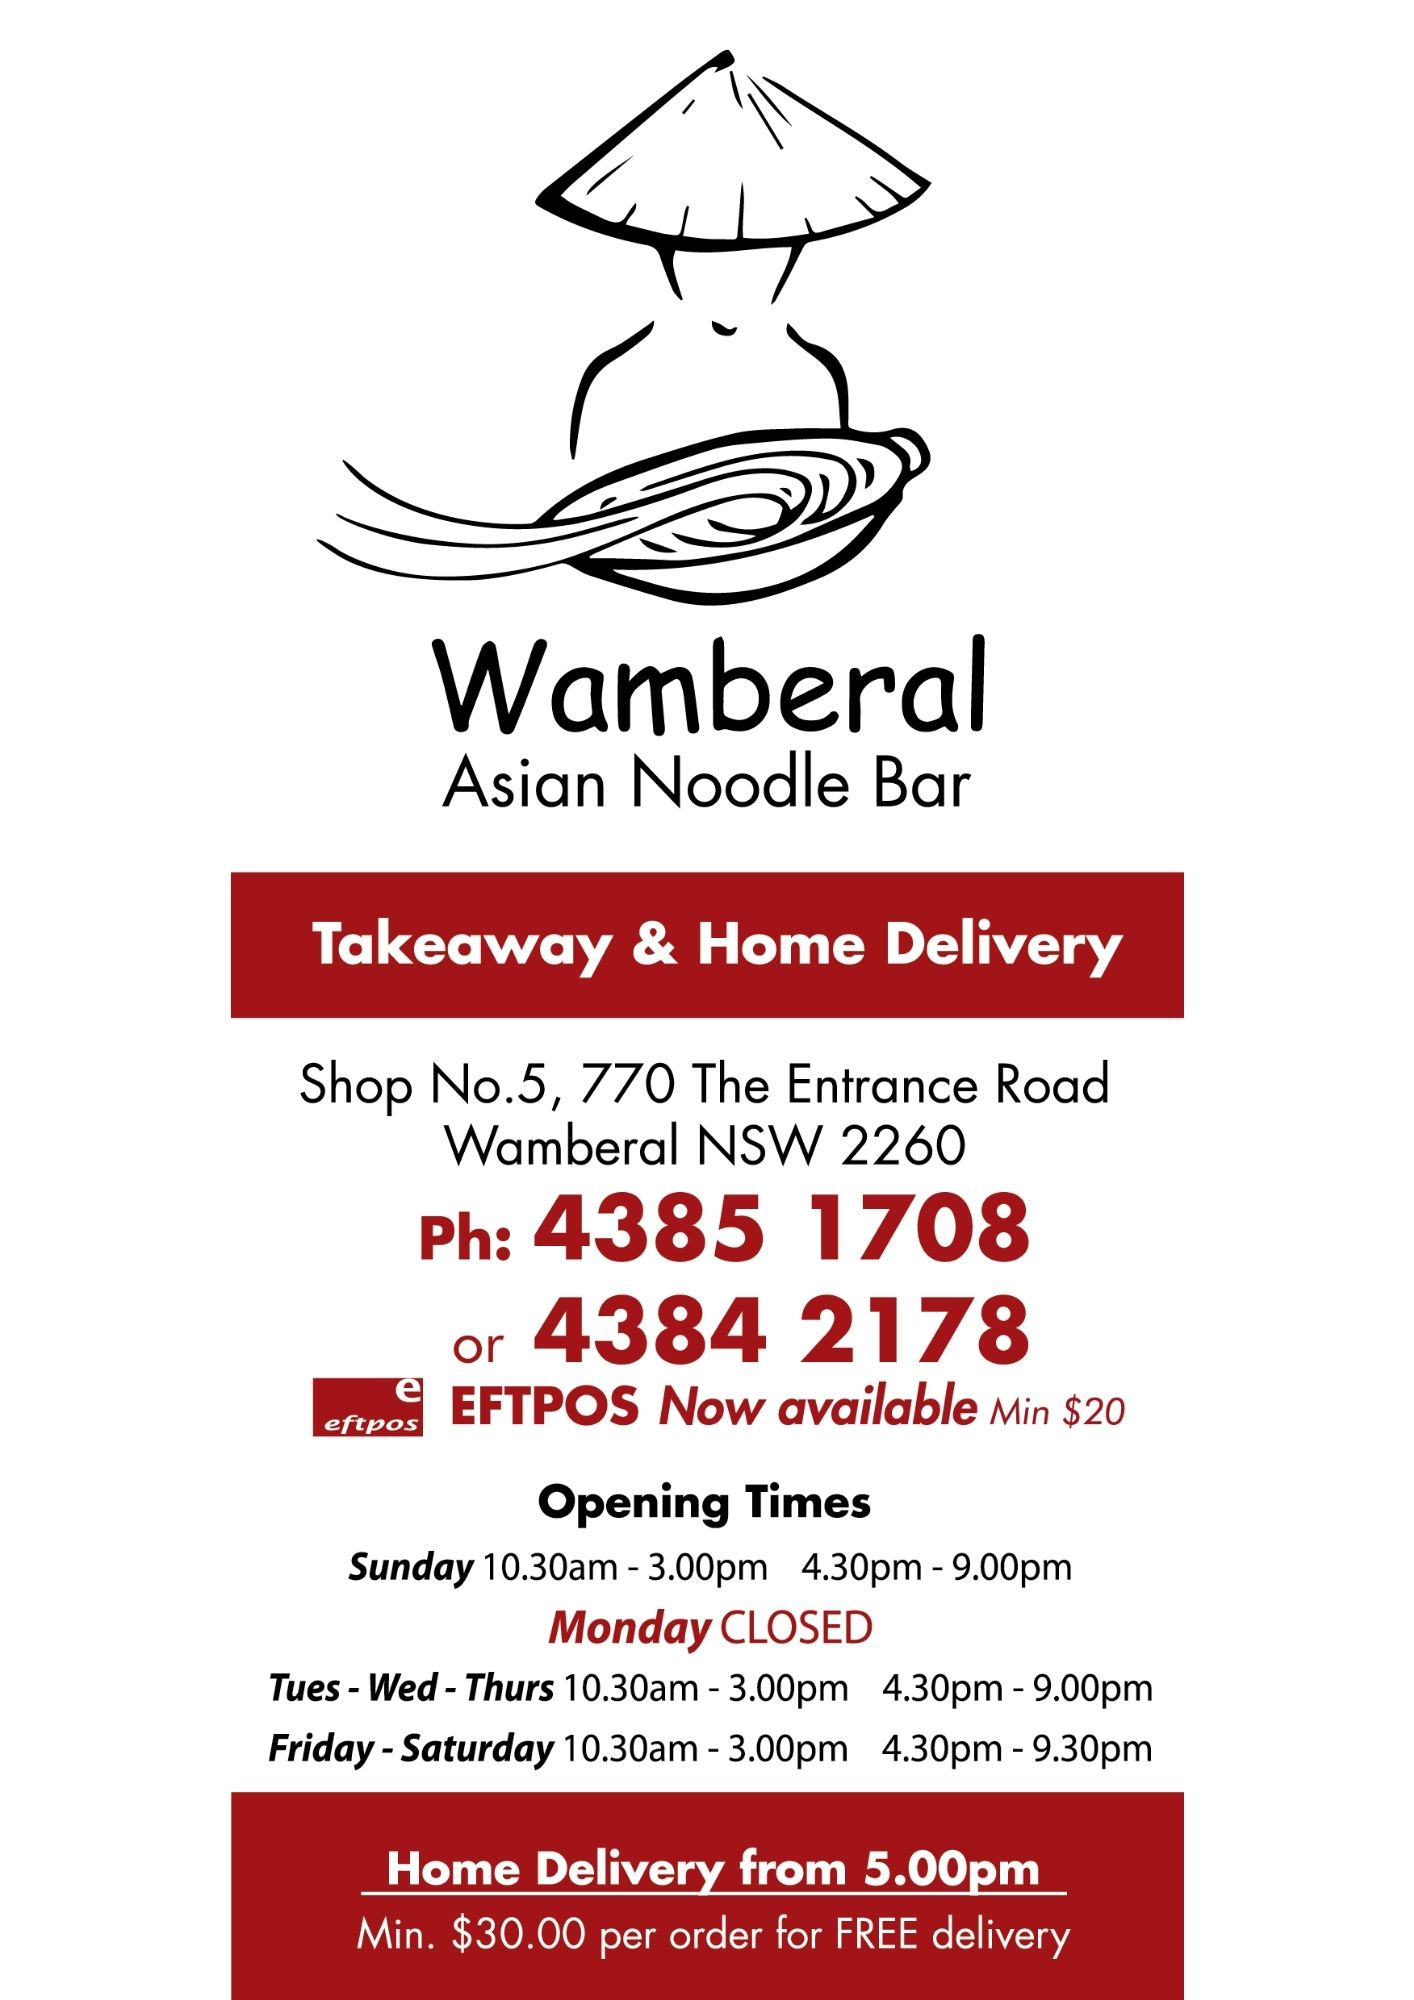 Wamberal Asian Noodle Bar Wamberal Central Coast - NSW | OBZ Online Business Zone